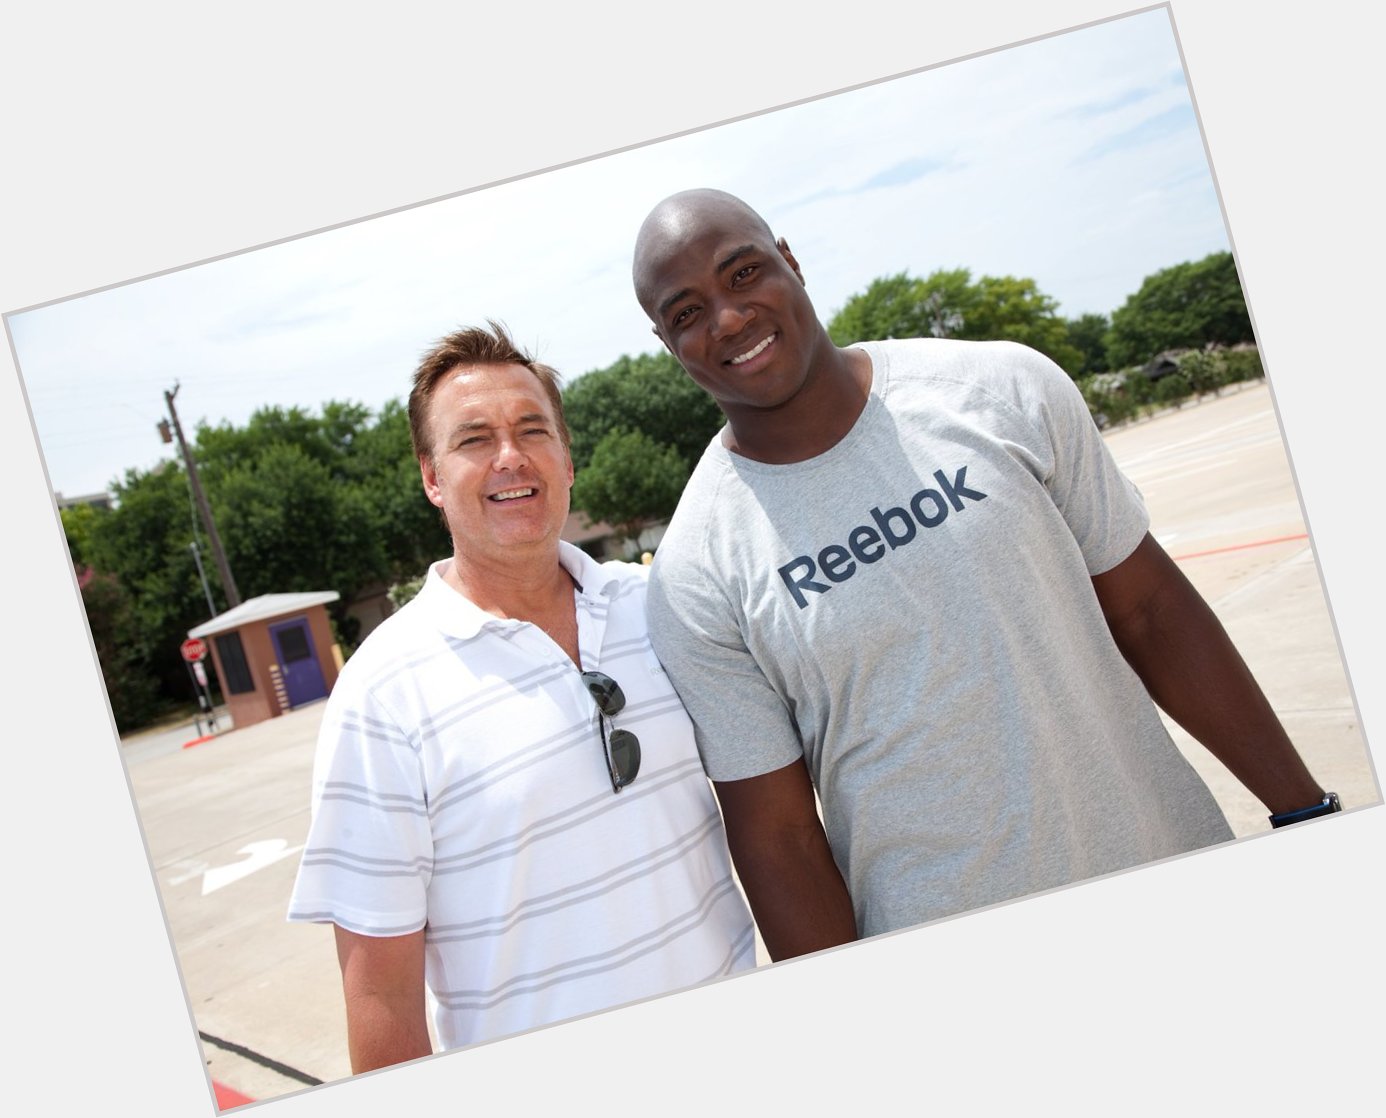 Happy Birthday to one of my favorites, DeMarcus Ware! 